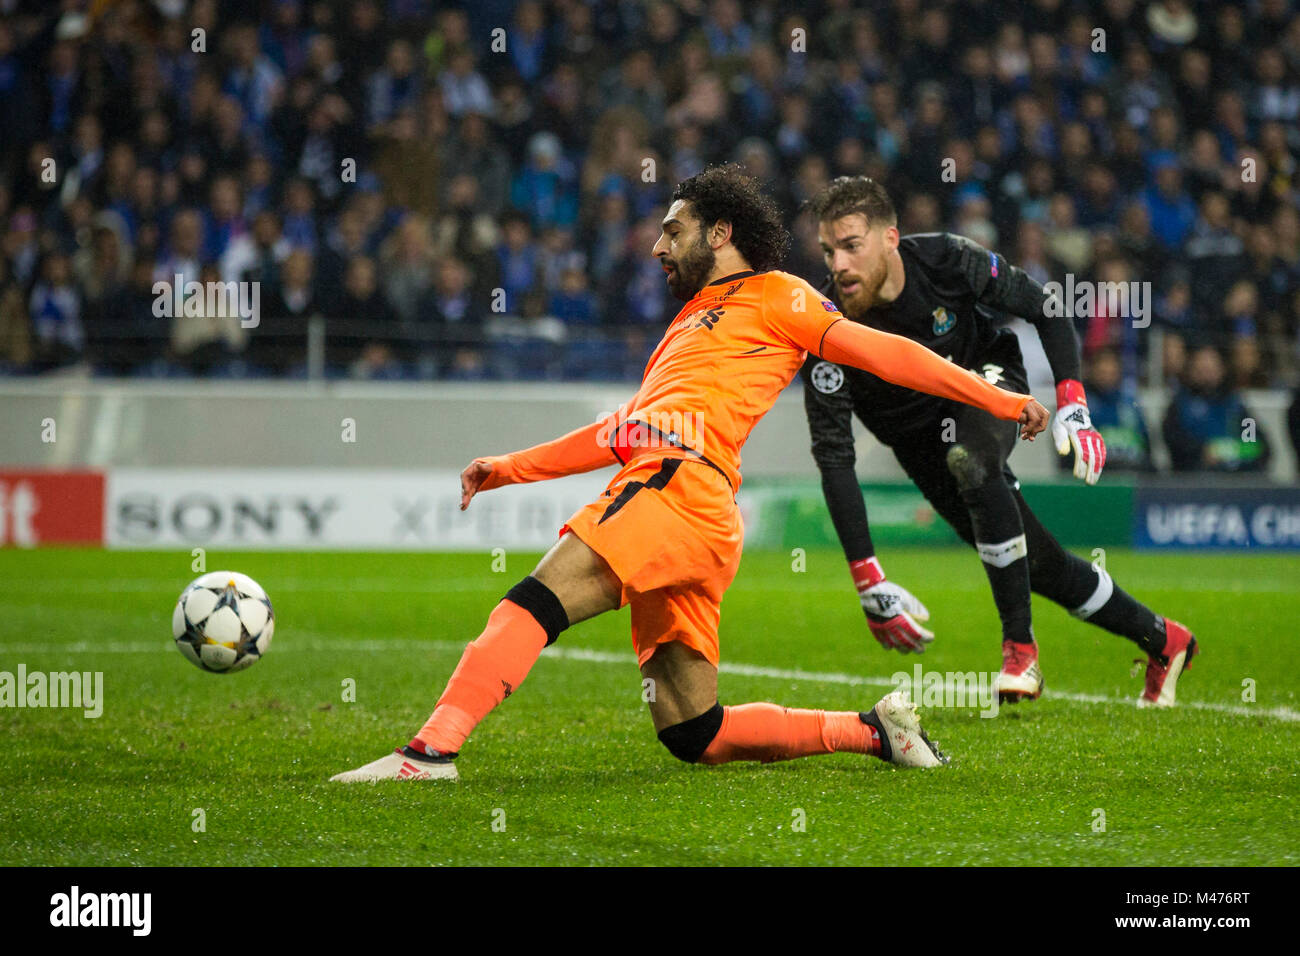 Porto, Portugal. 14th February, 2018. Liverpool FC player Mahamed Salah scores  the second goal during the UEFA CHampions League round 16 first leg 2017/18  match between FC Porto and Liverpool FC, at